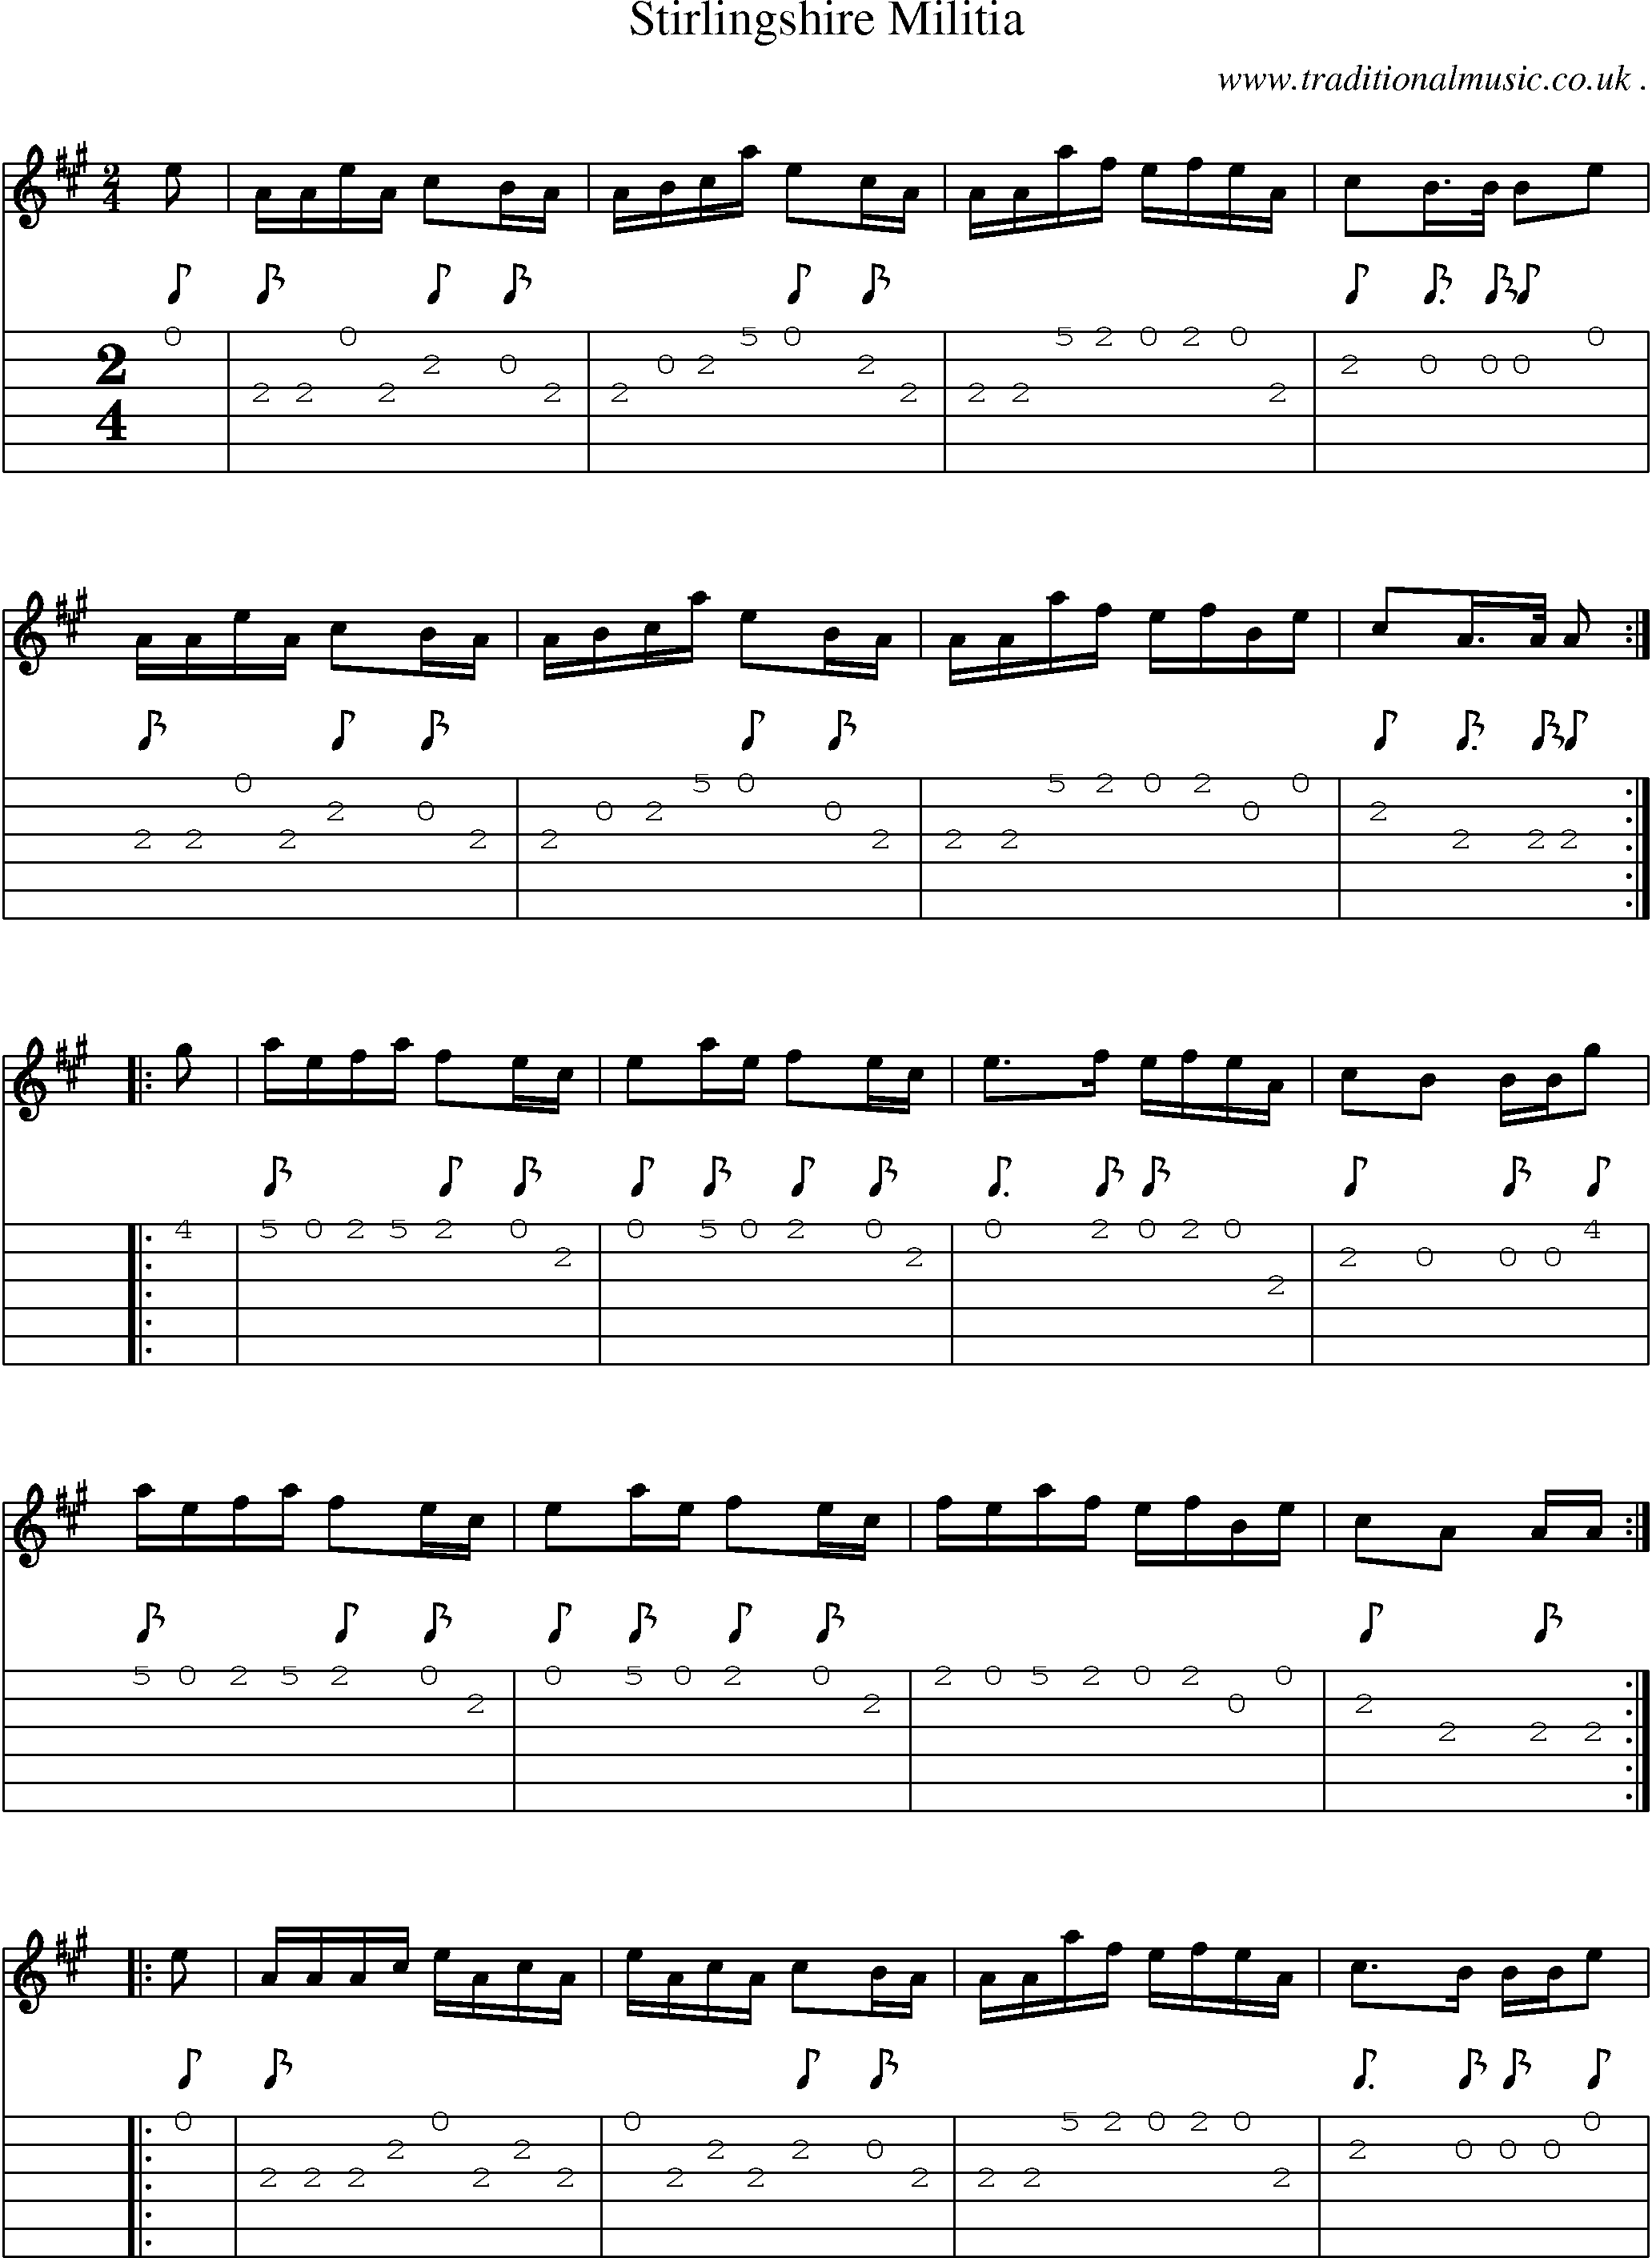 Sheet-music  score, Chords and Guitar Tabs for Stirlingshire Militia